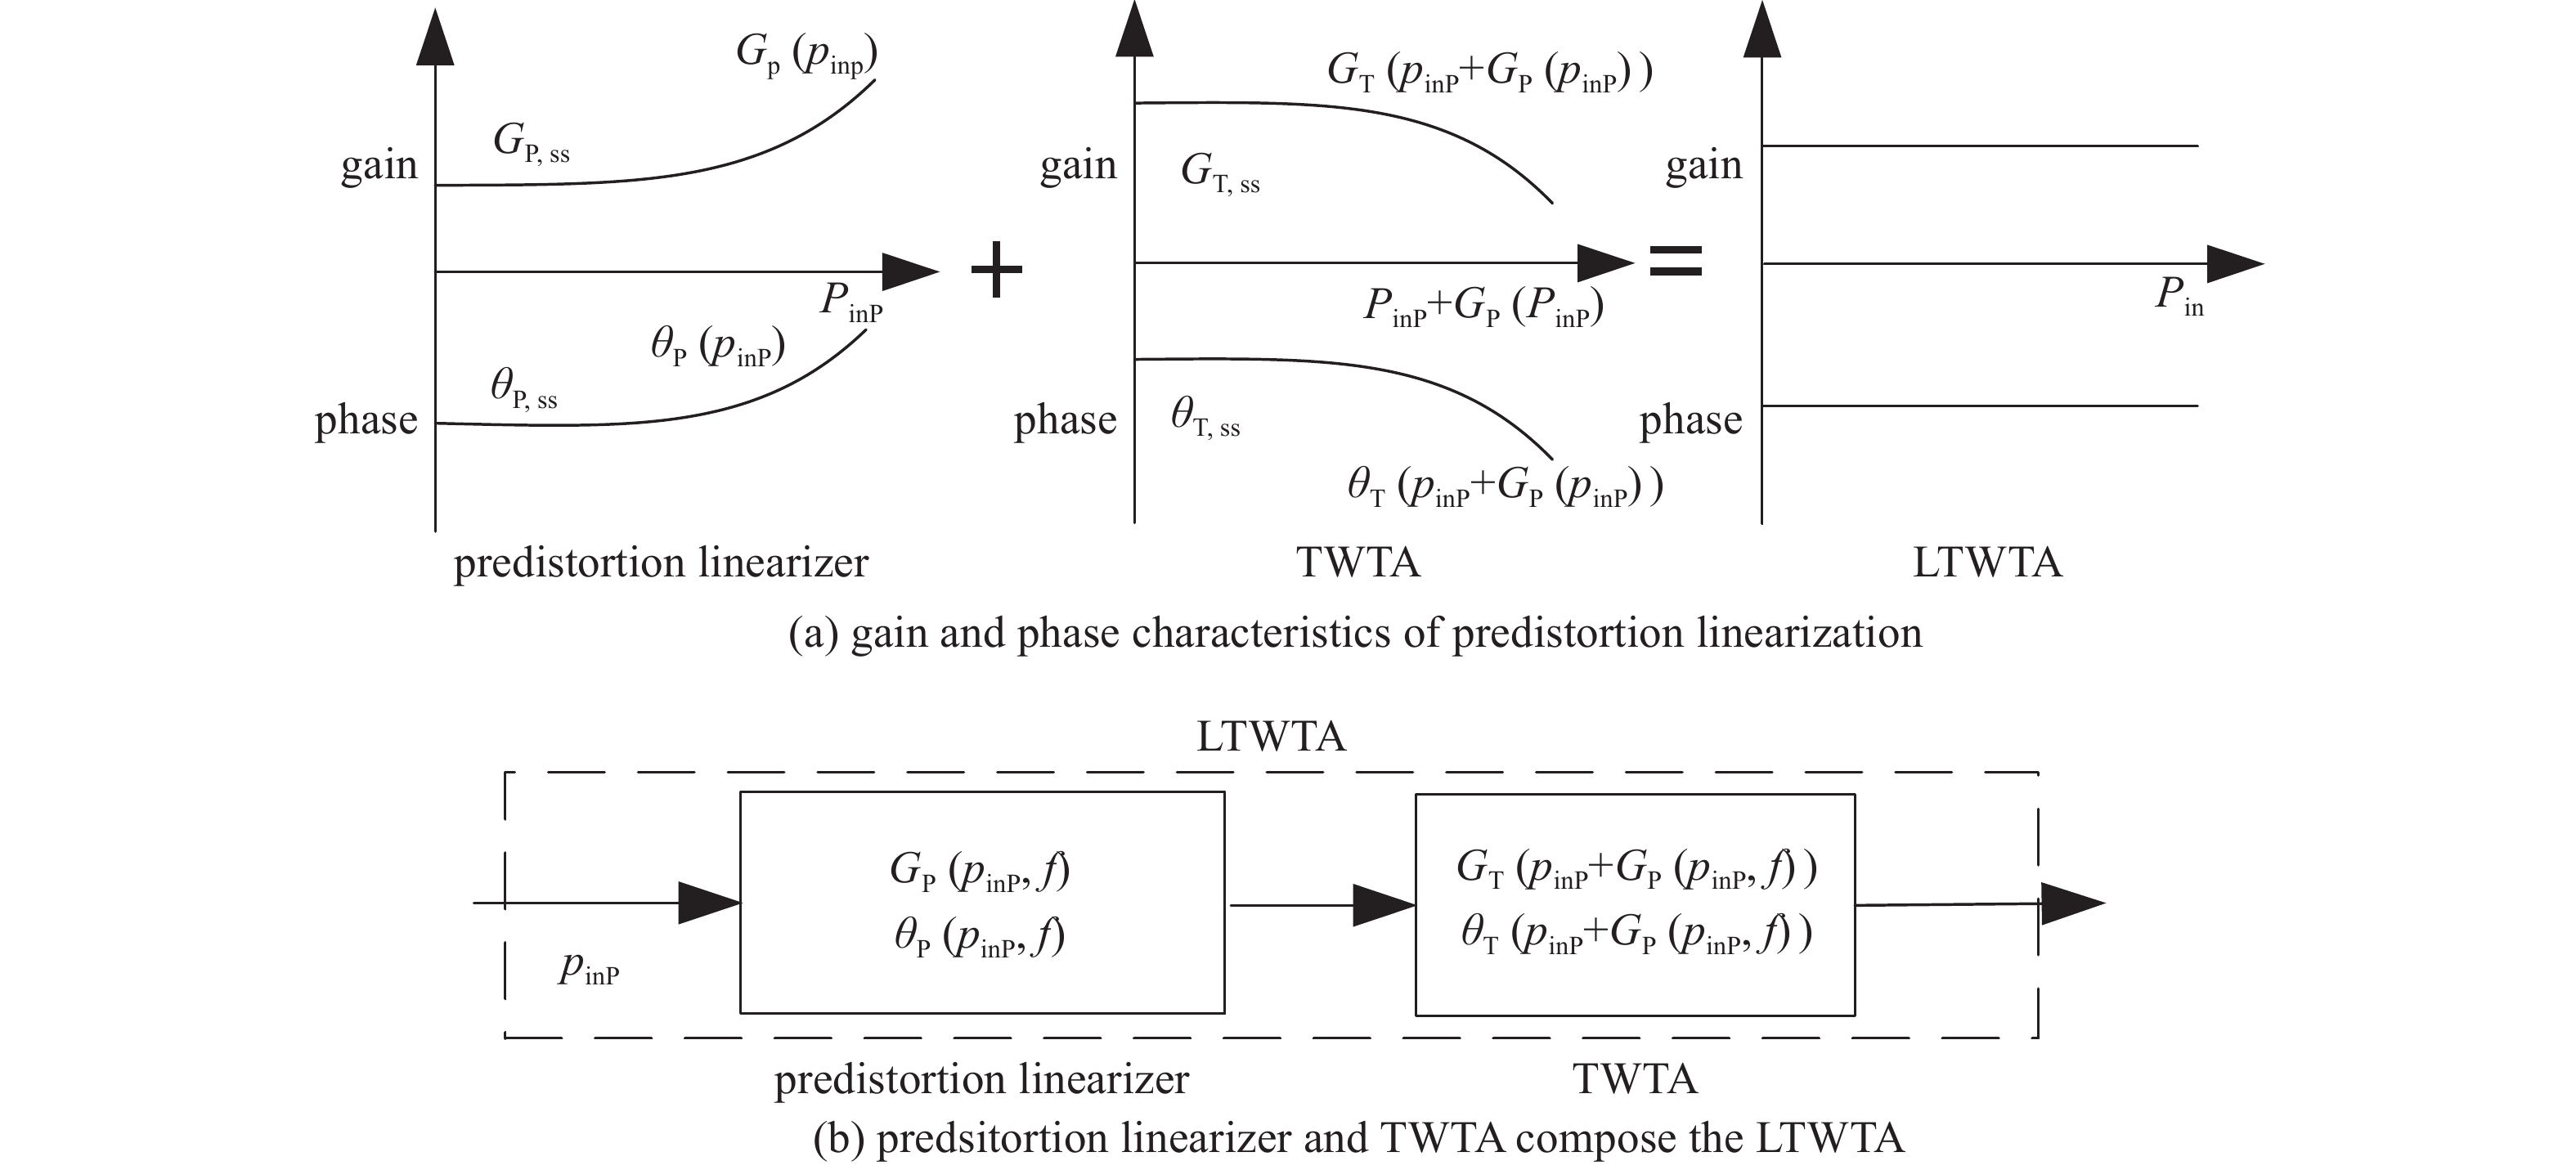 Theoretical model of predistortion linearizer